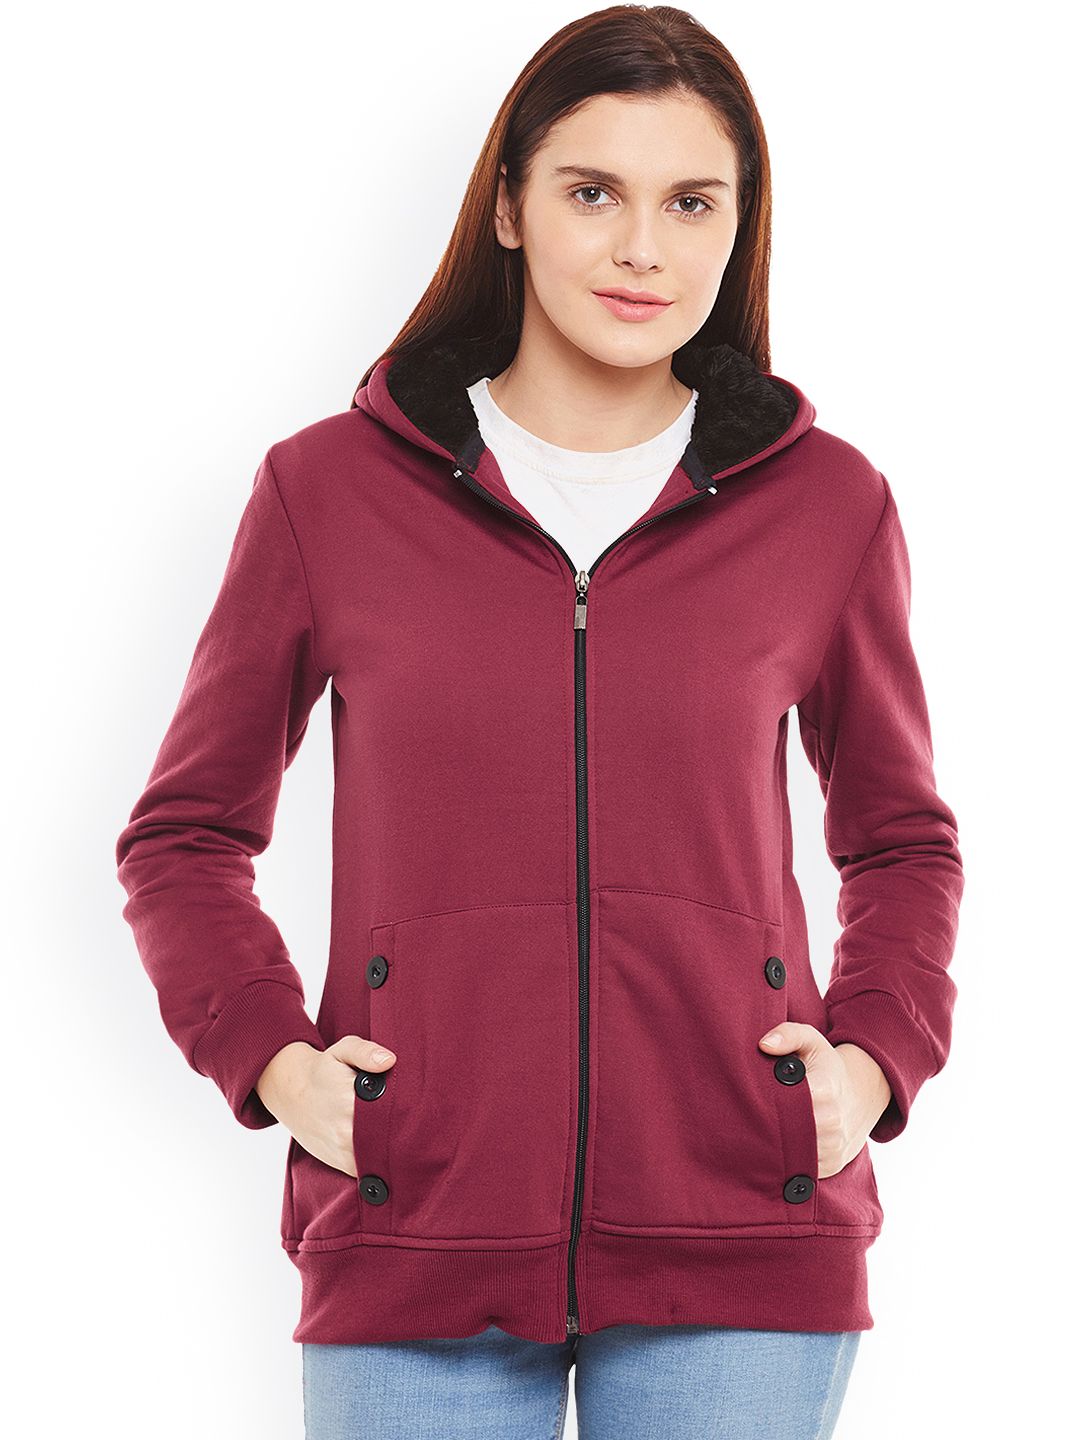 Belle Fille Maroon Sporty Jacket Price in India